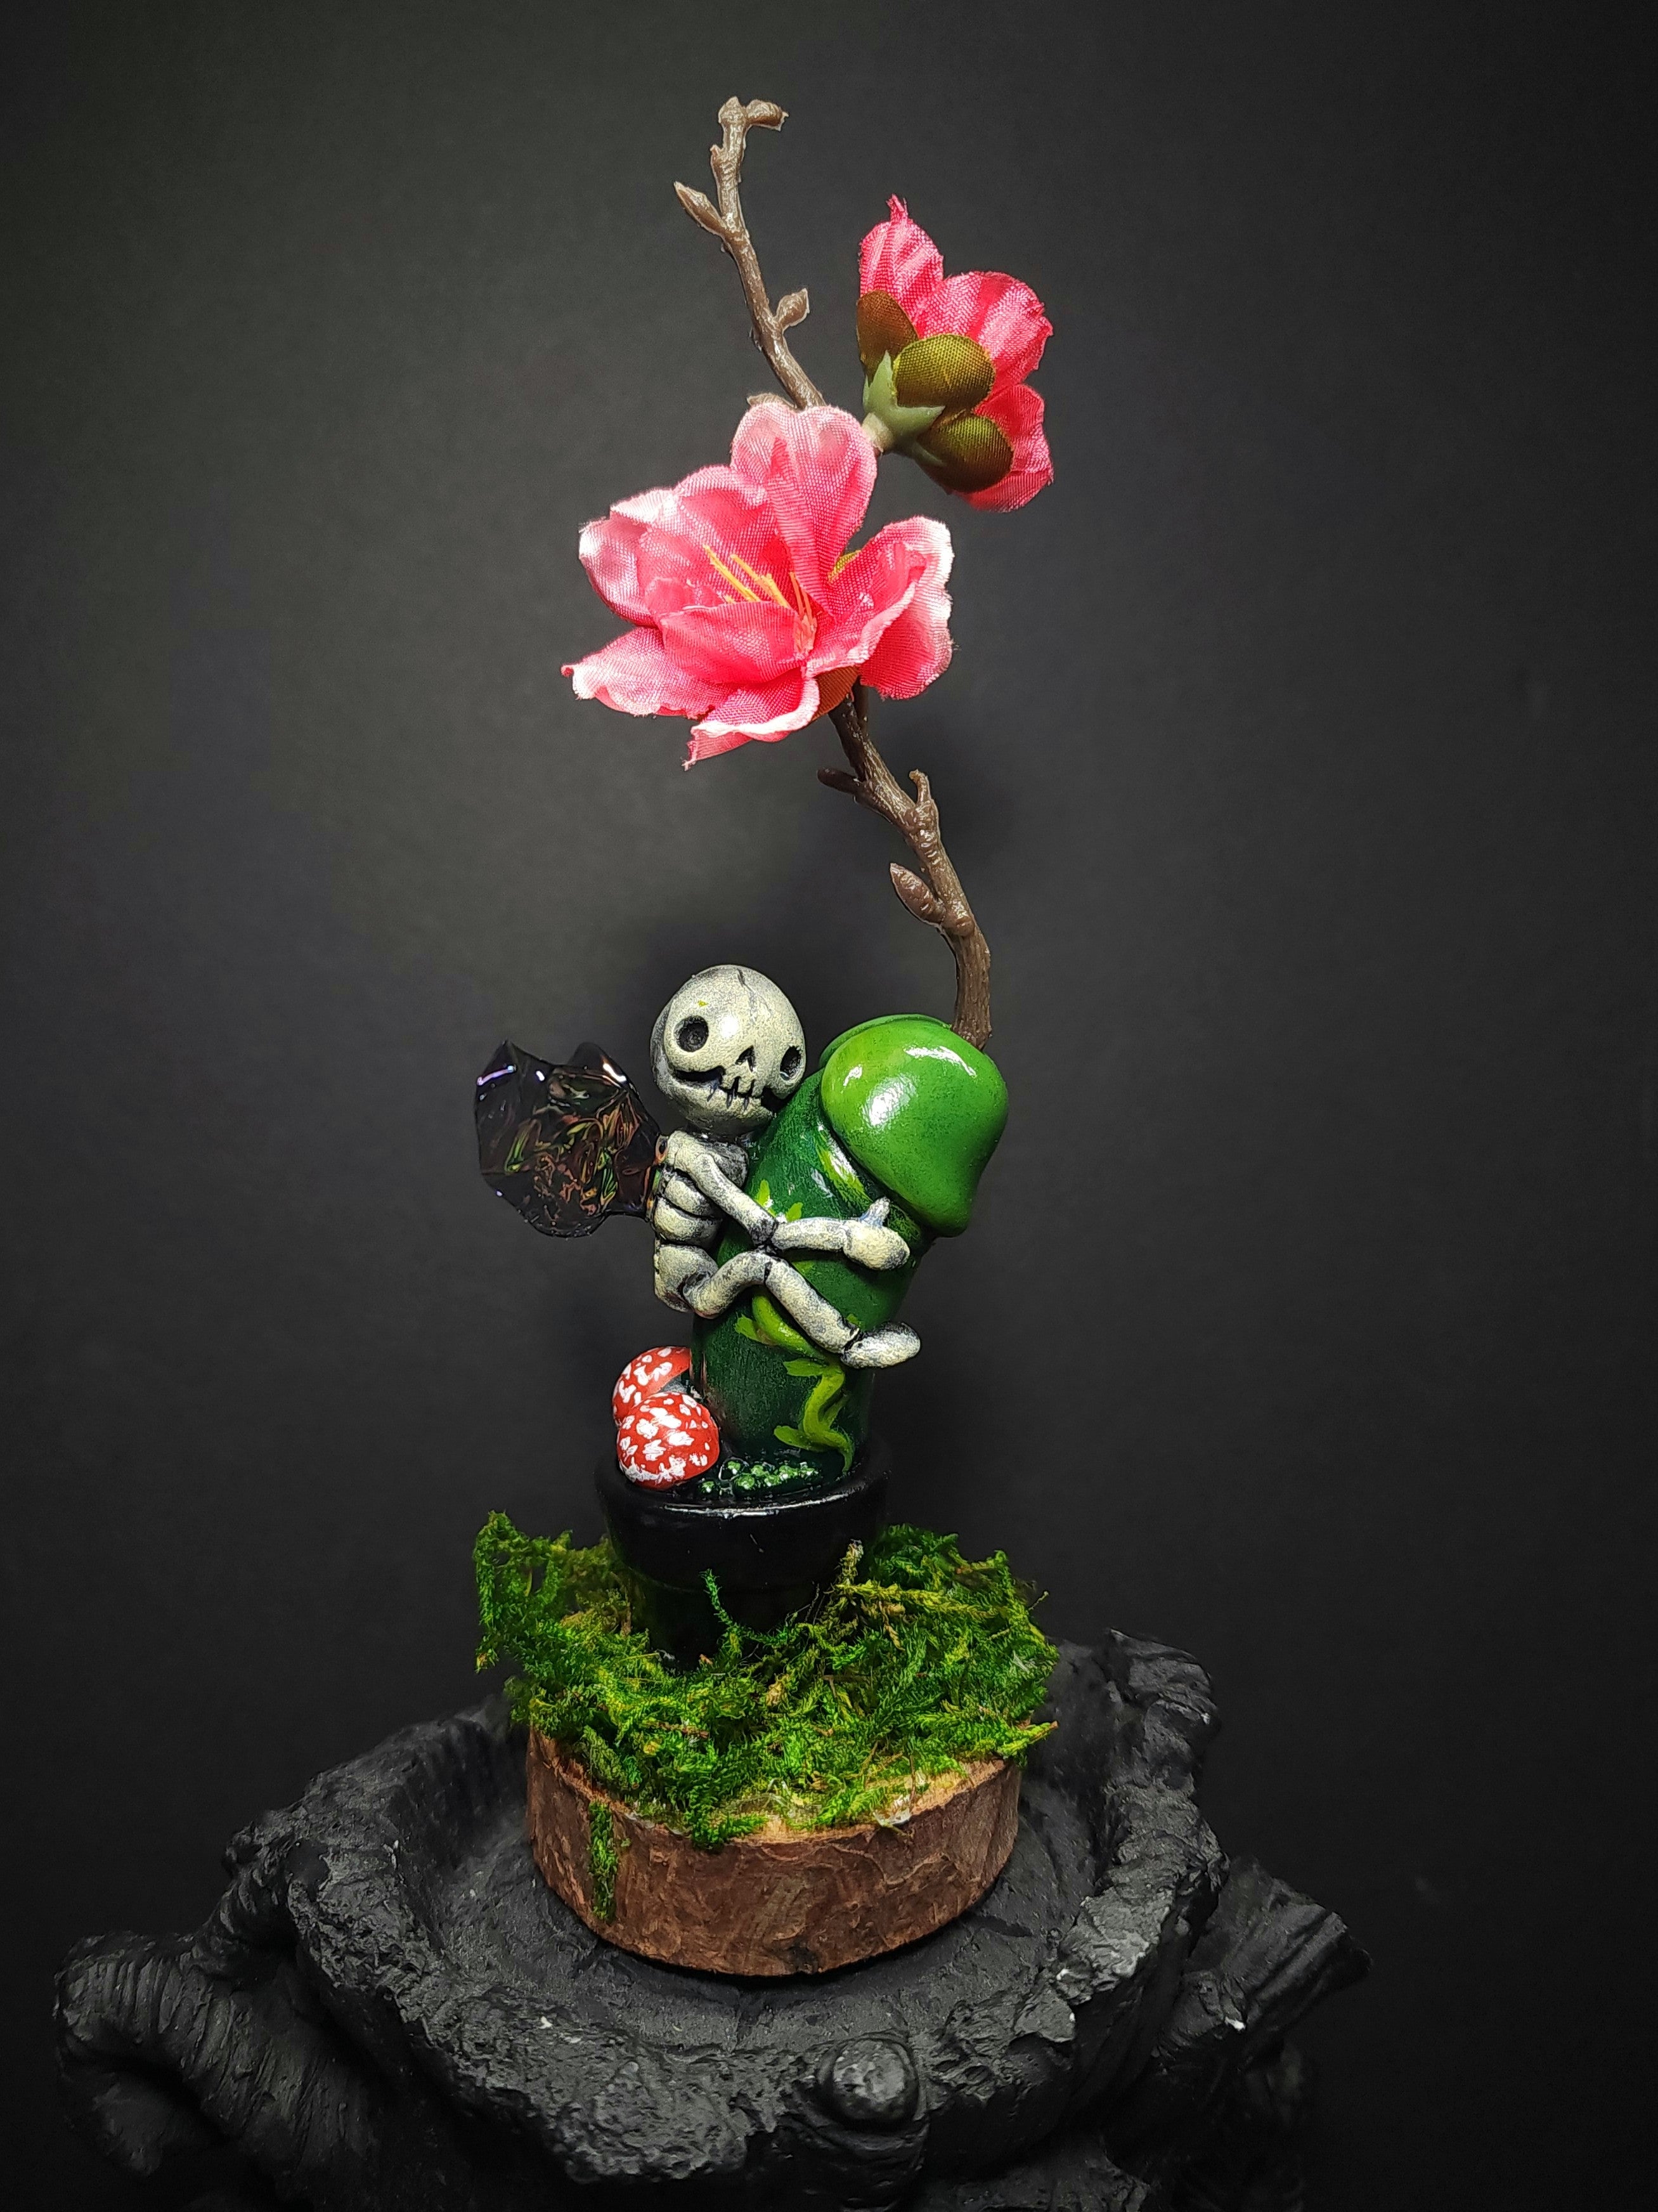 Polymer Clay statue of skeleton with mushroom and flower, green plant on stump, and pink flower on branch by Simon Says Macy & Friends - Prick Riding Fairy.